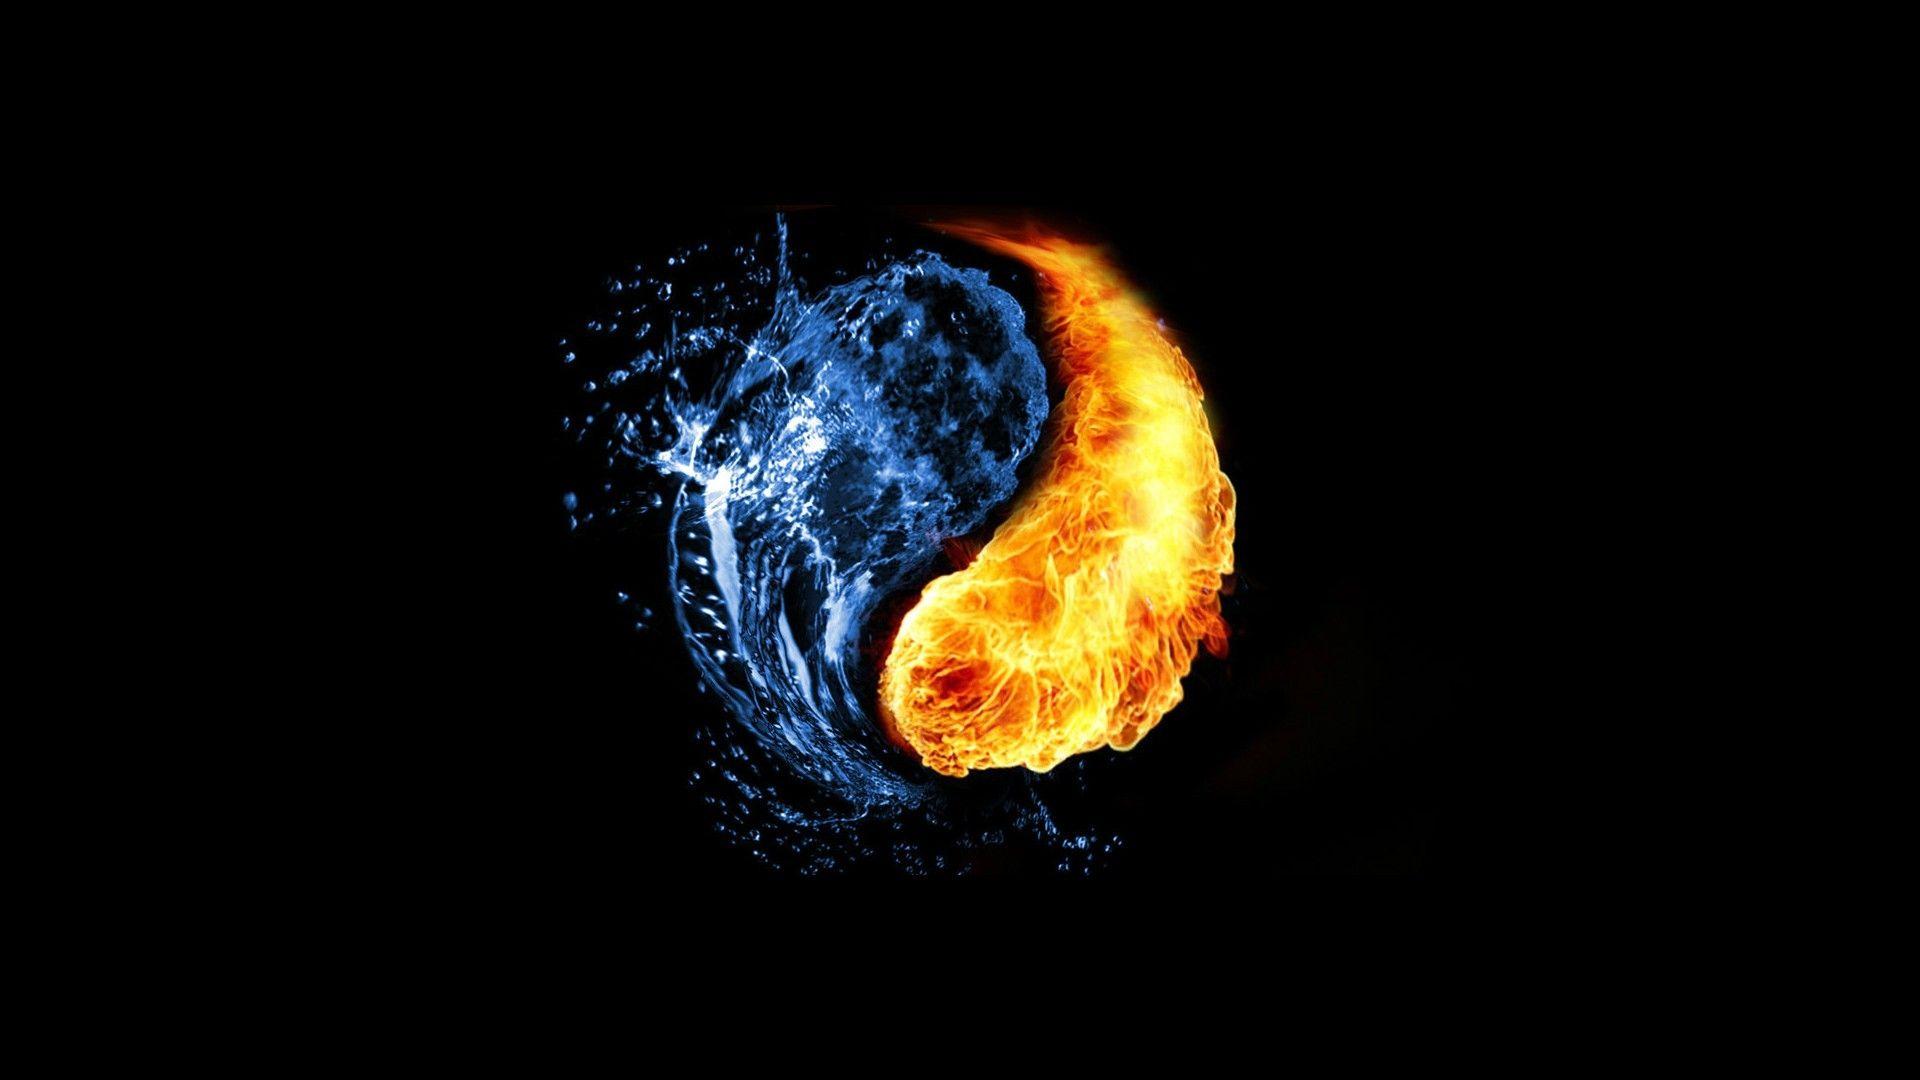 Water abstract fire ying yang black background wallpaperx1080